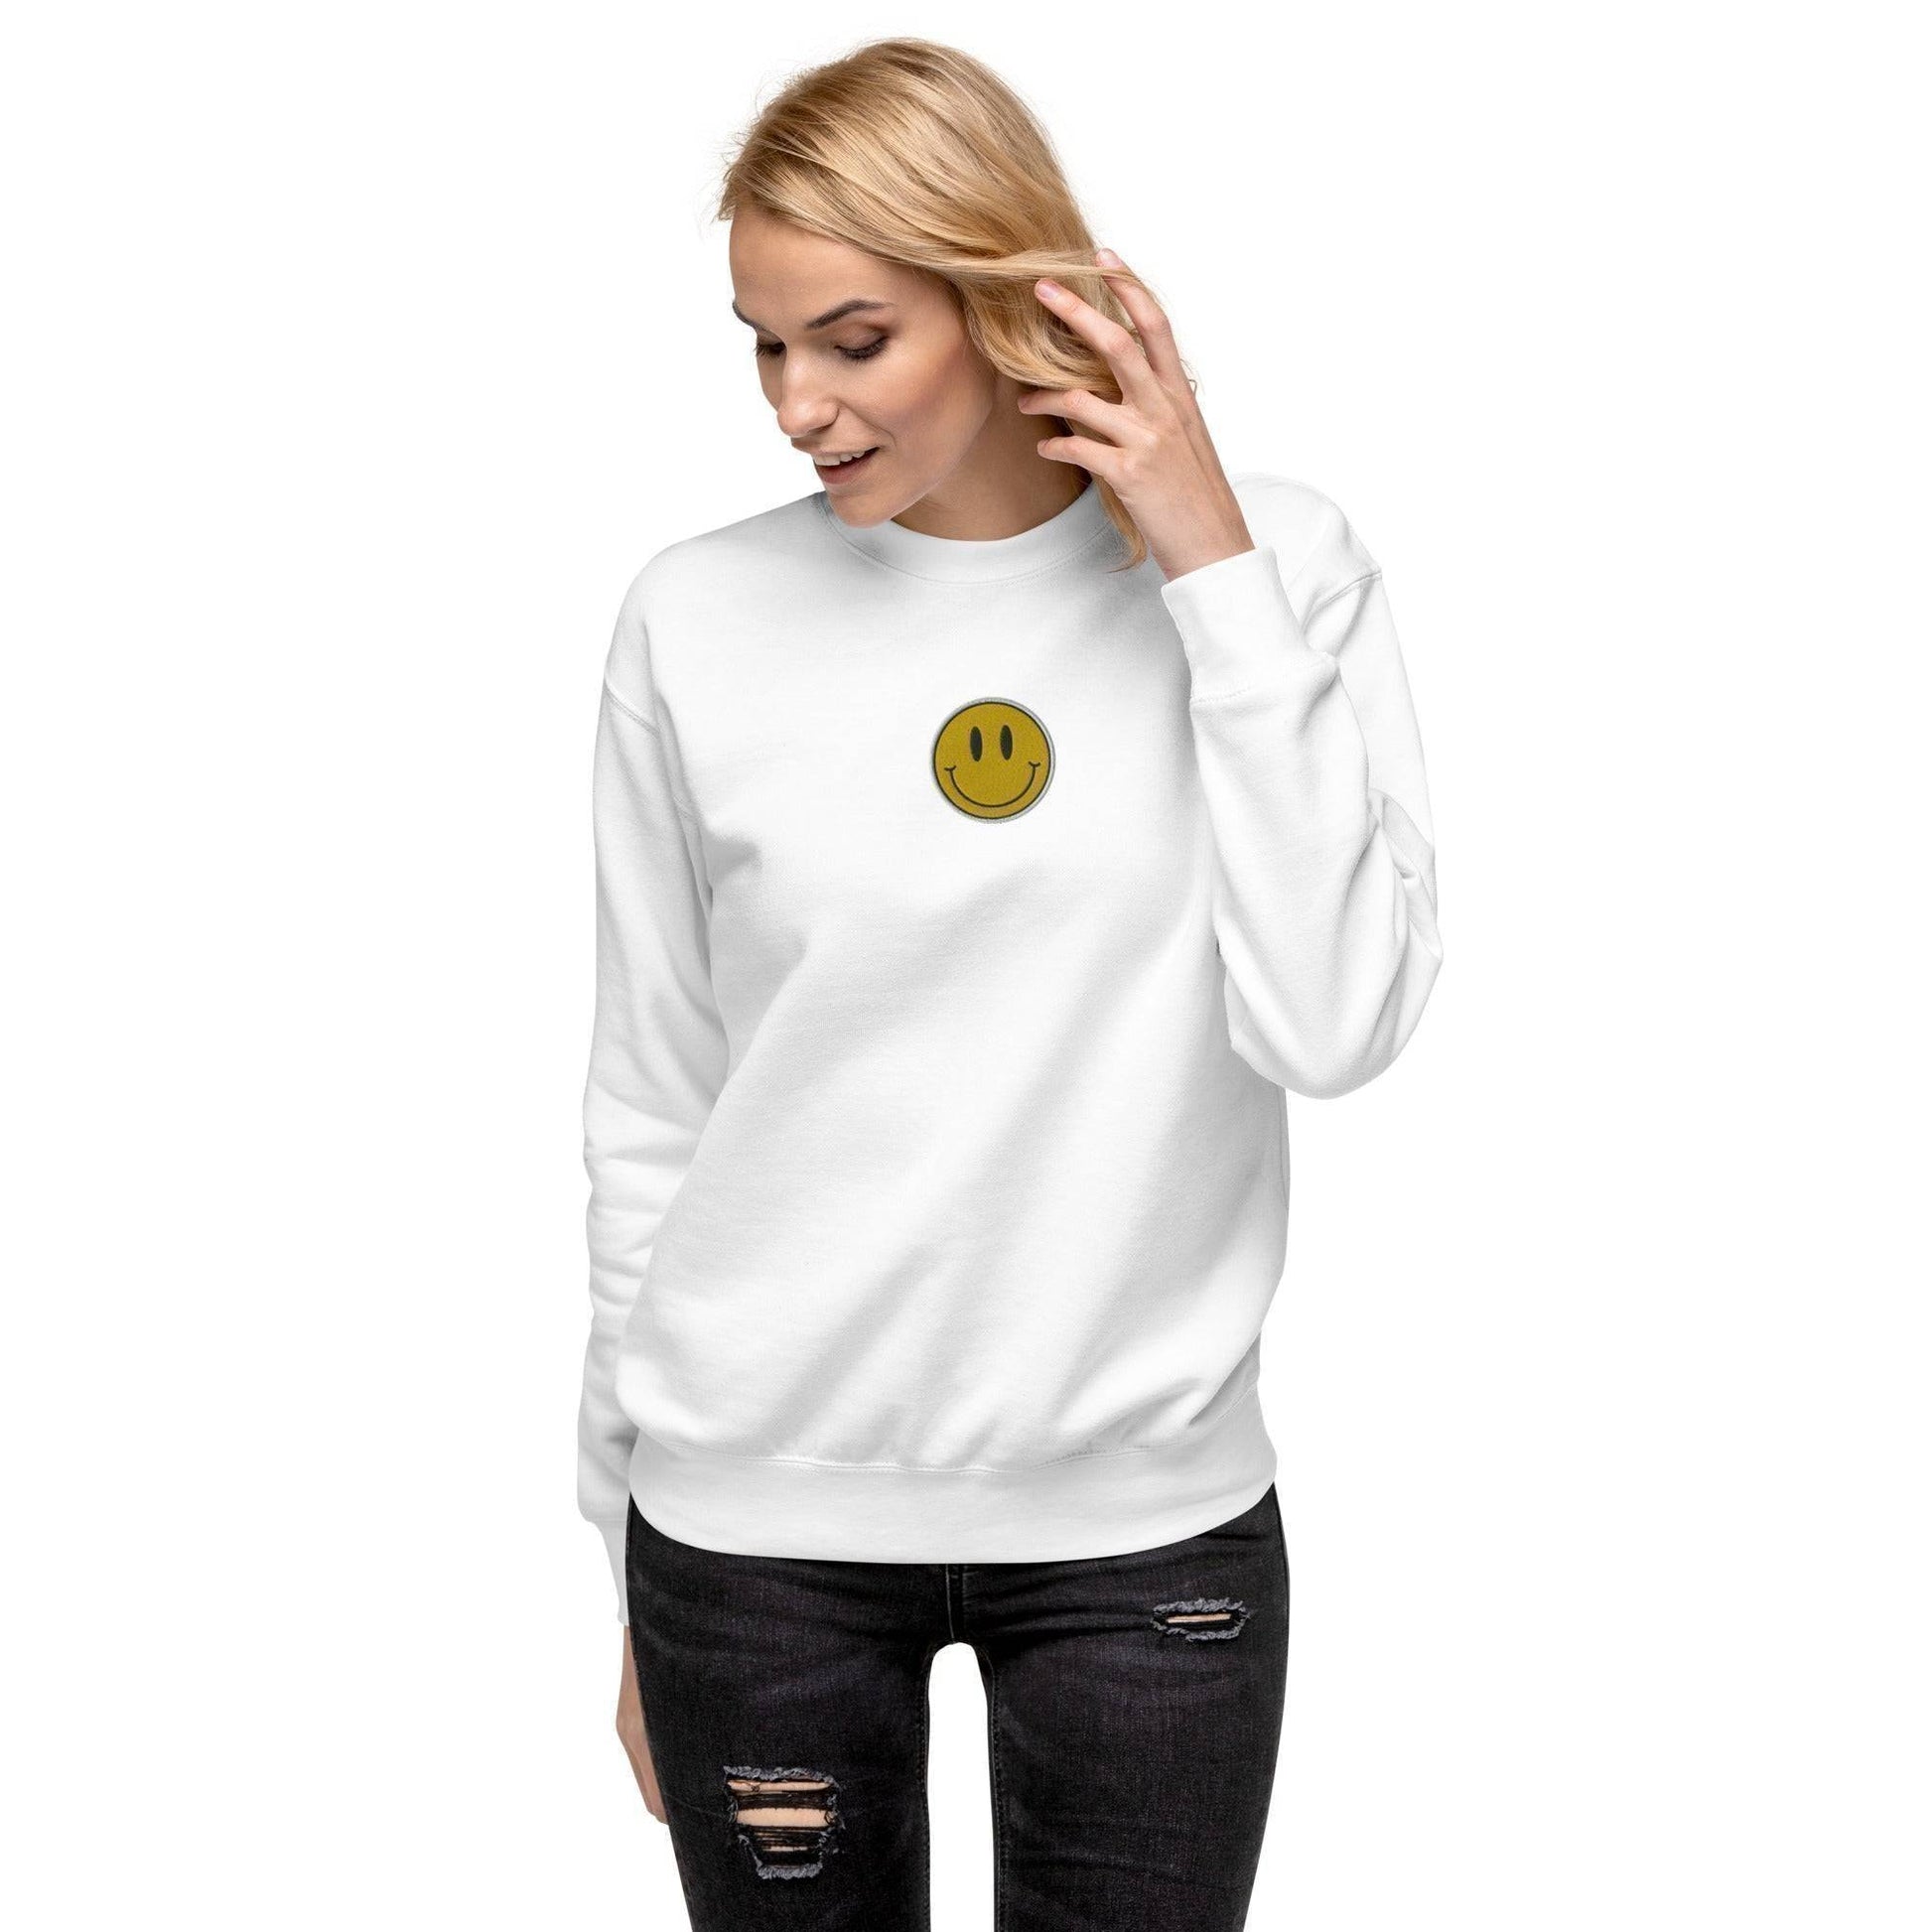 You Should Smile More Embroidered Sweatshirt White